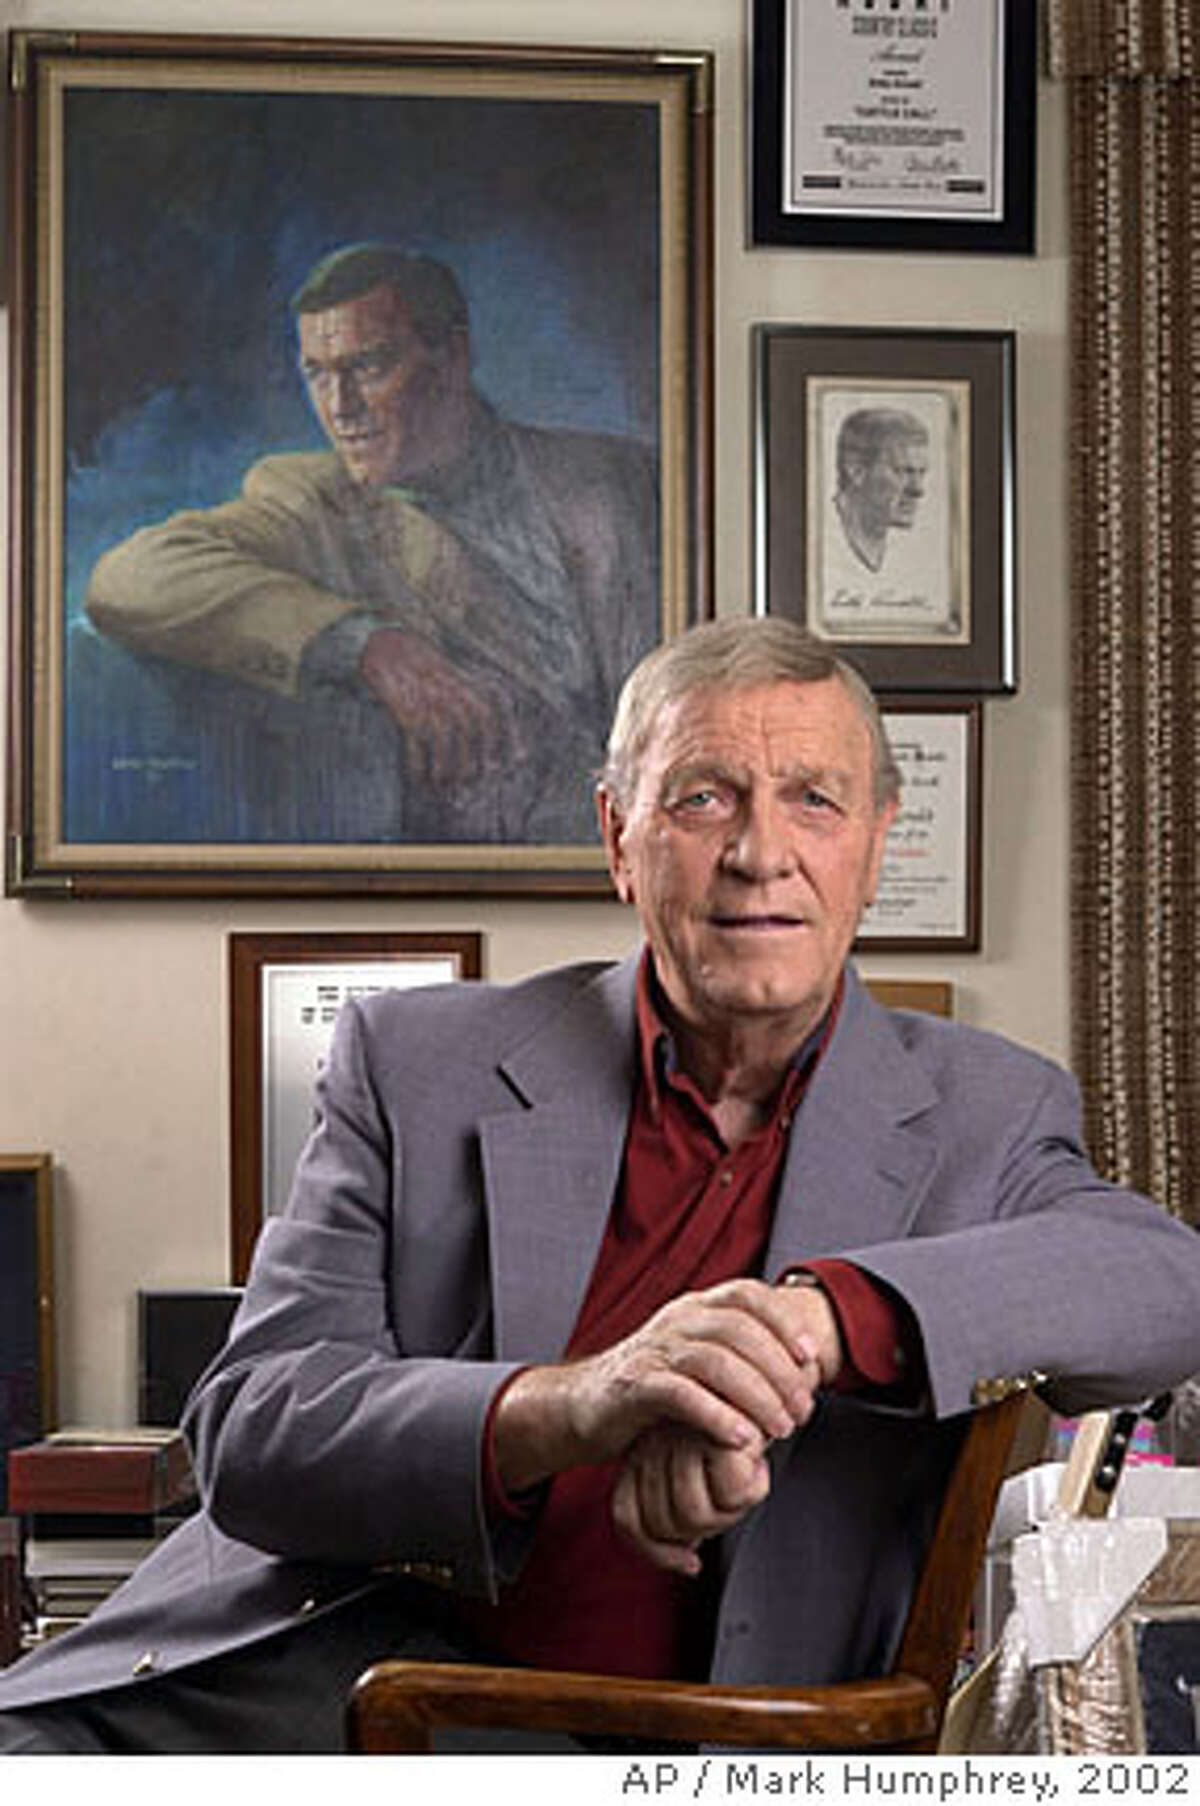 ** In this Jan. 18, 2002 file photo, country music legend Eddy Arnold is shown in his memorabilia-filled office in Brentwood, Tenn. Arnold died at a care facility near Nashville Thursday morning May 8, 2008. He was 89. (AP Photo/Mark Humphrey,File)